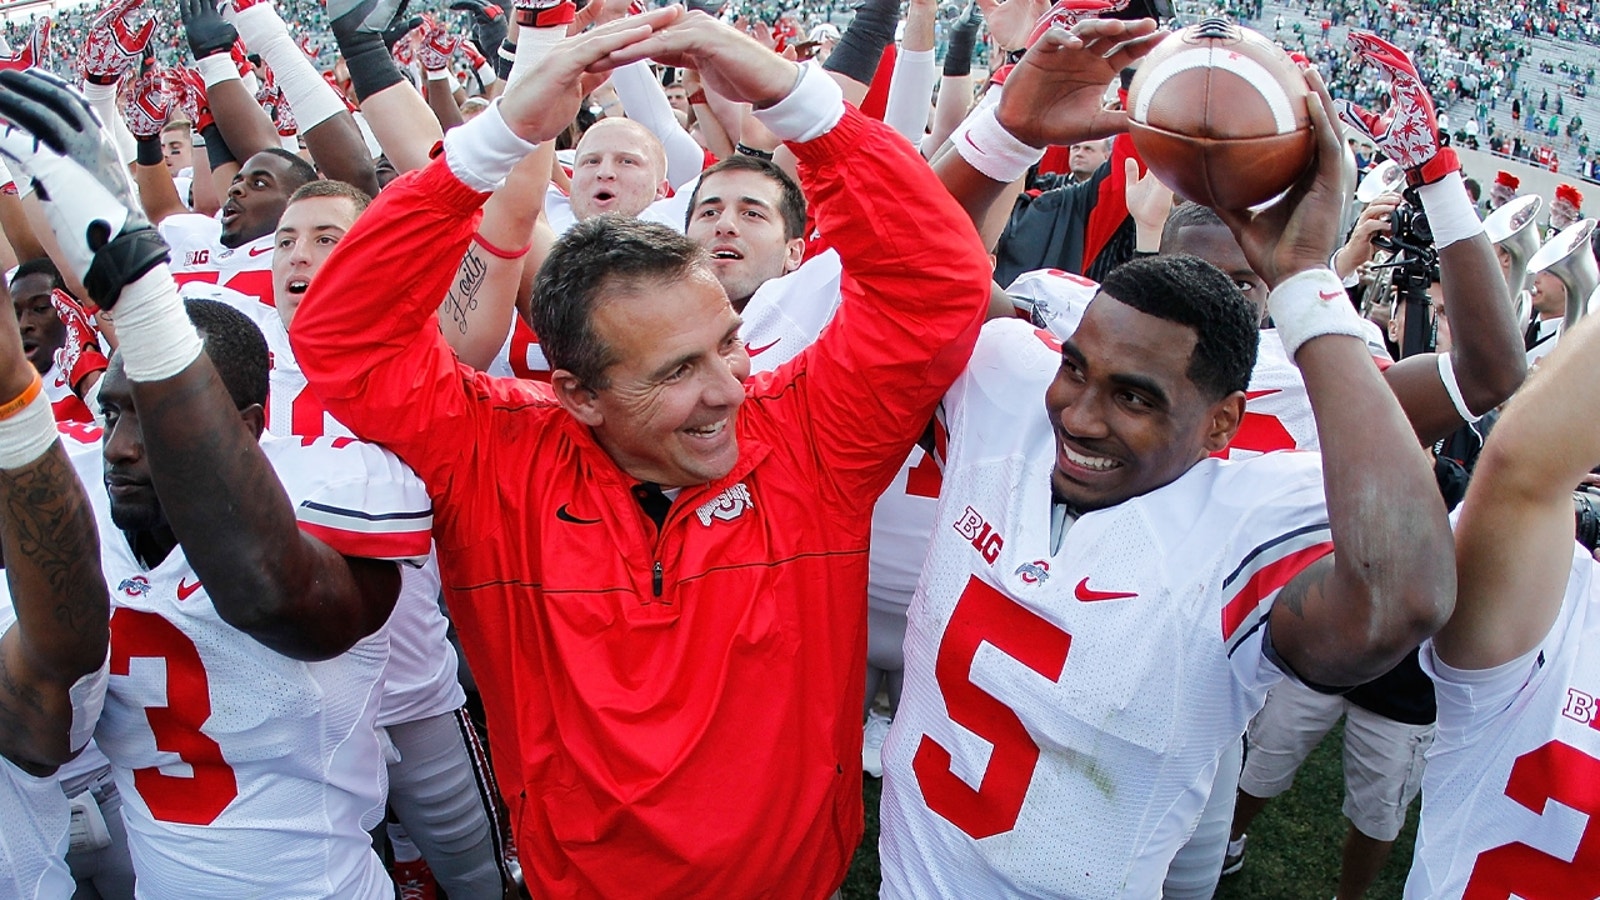 Urban Meyer: Ohio State is still 'reaping the rewards' from the 2012 Buckeyes team